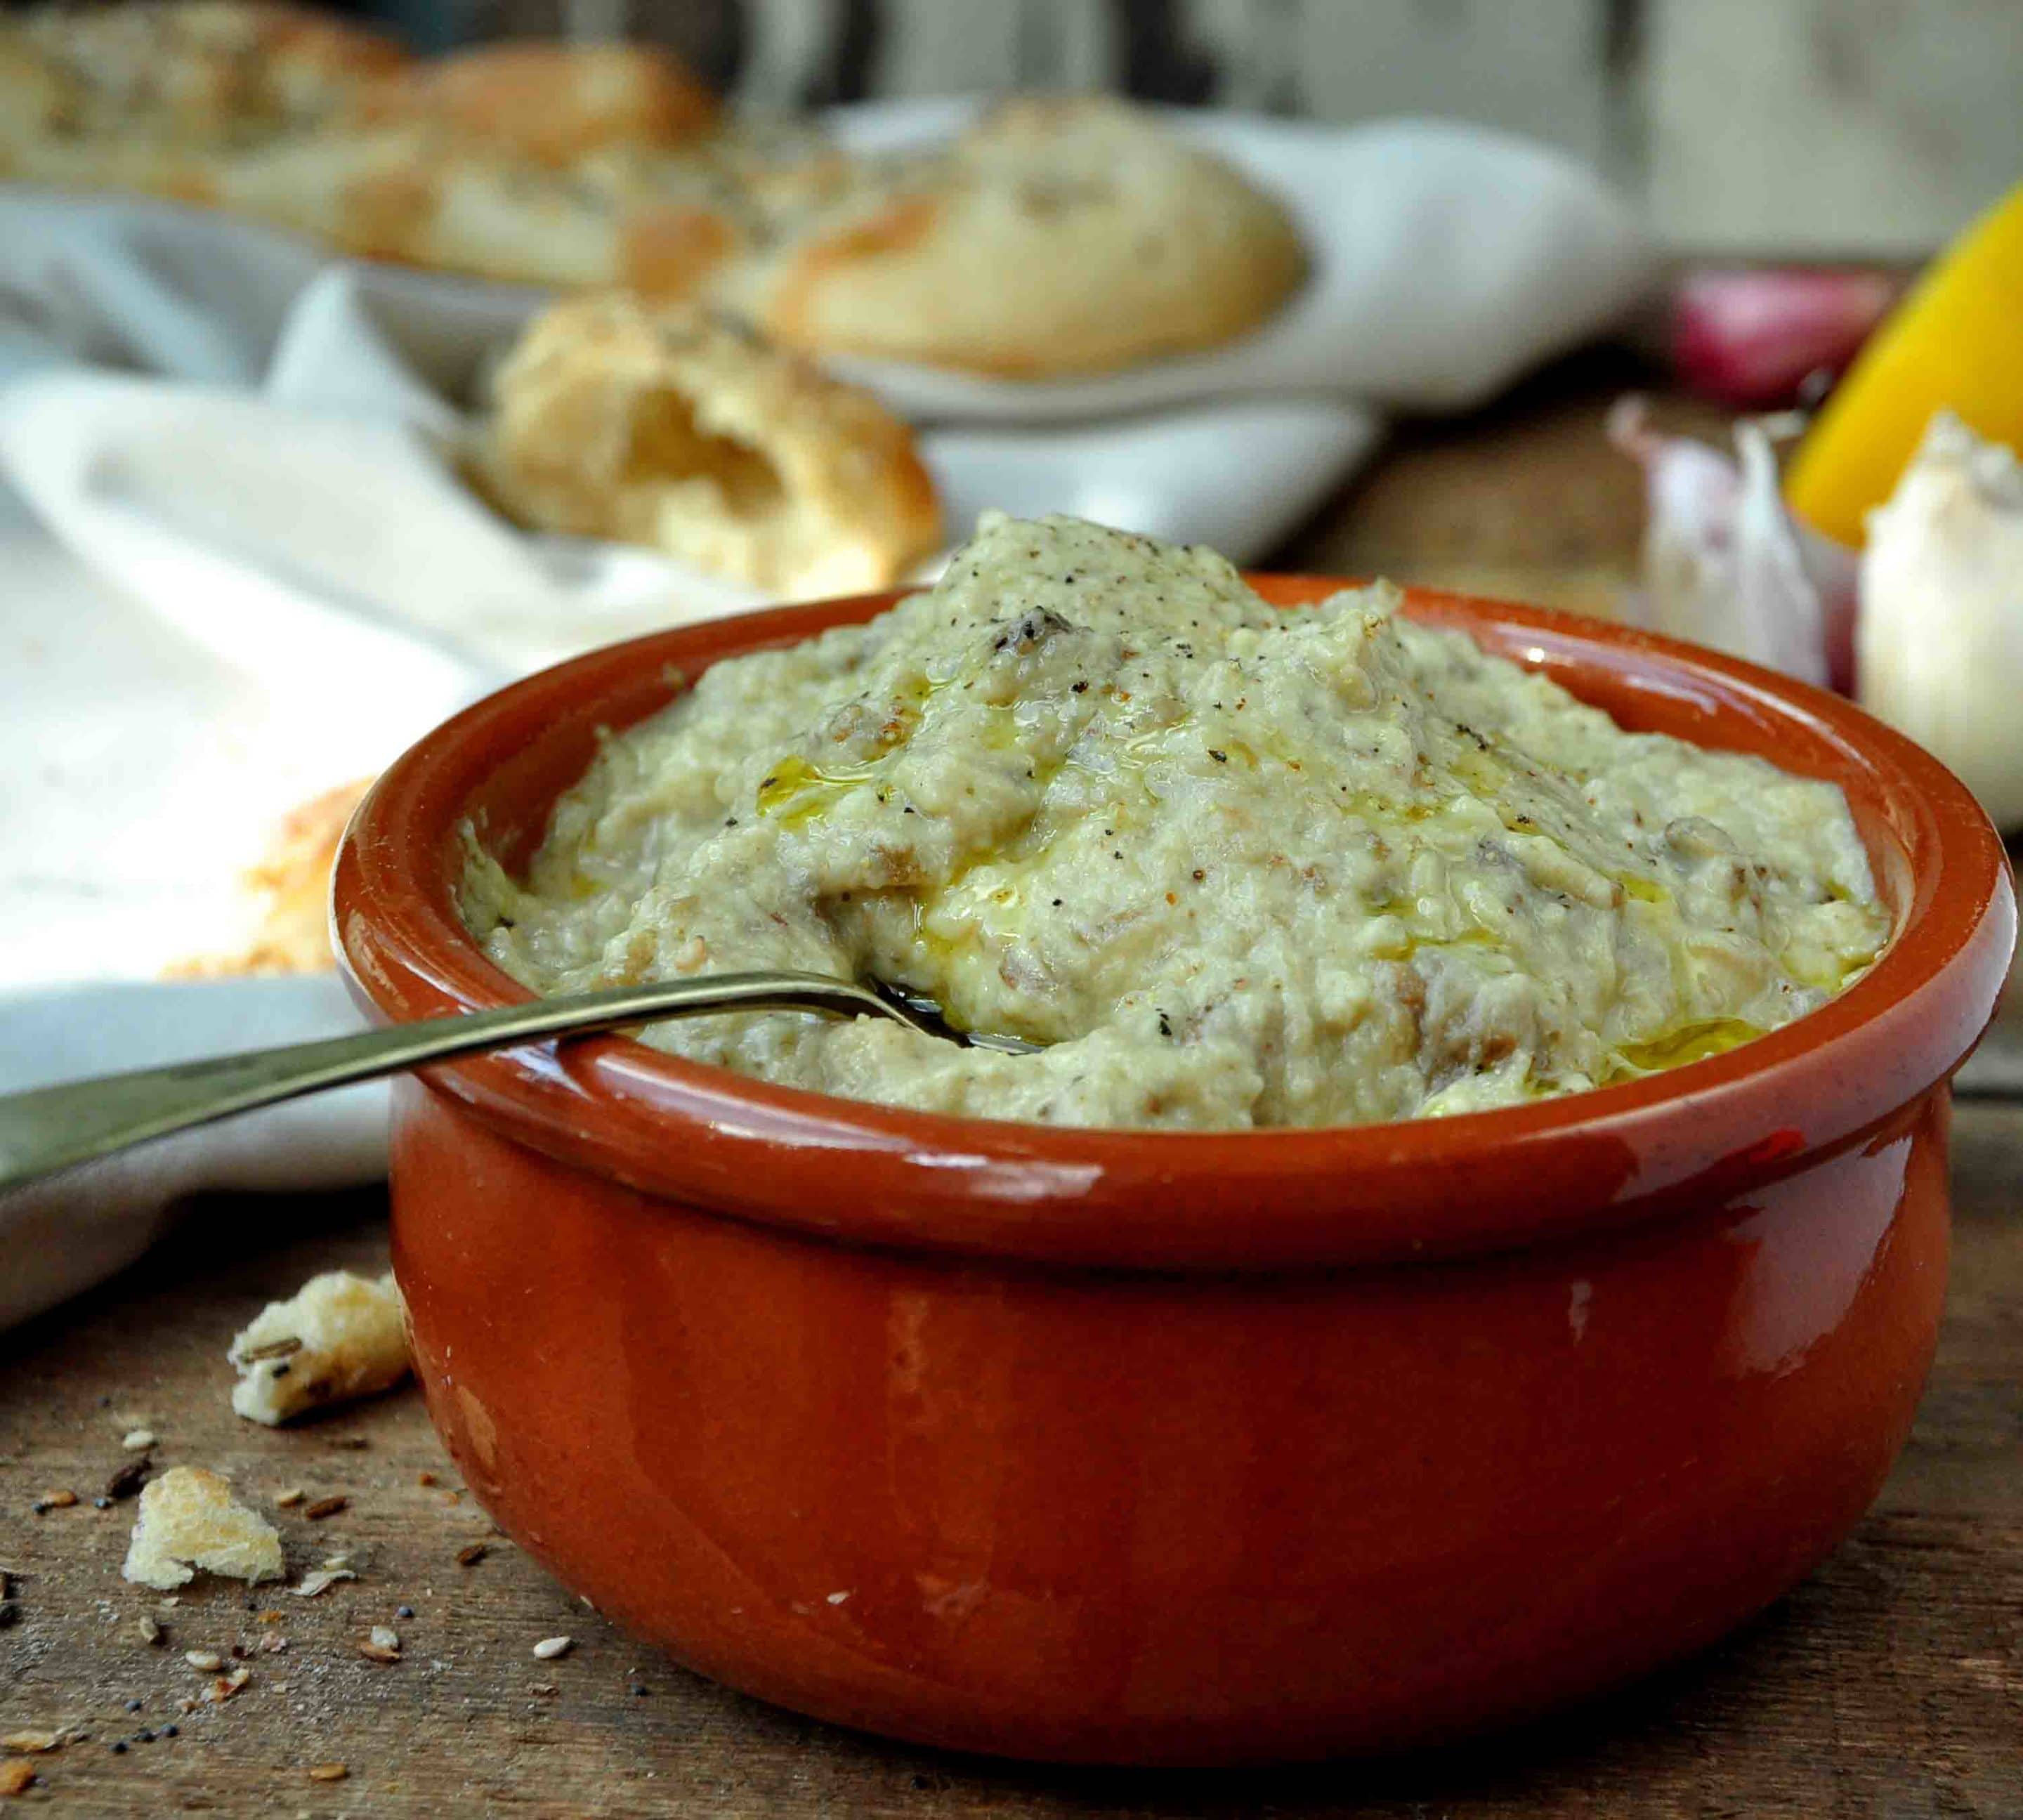 a terracotta dish with an aubergine dip for serving with flat breads as part of a mezze